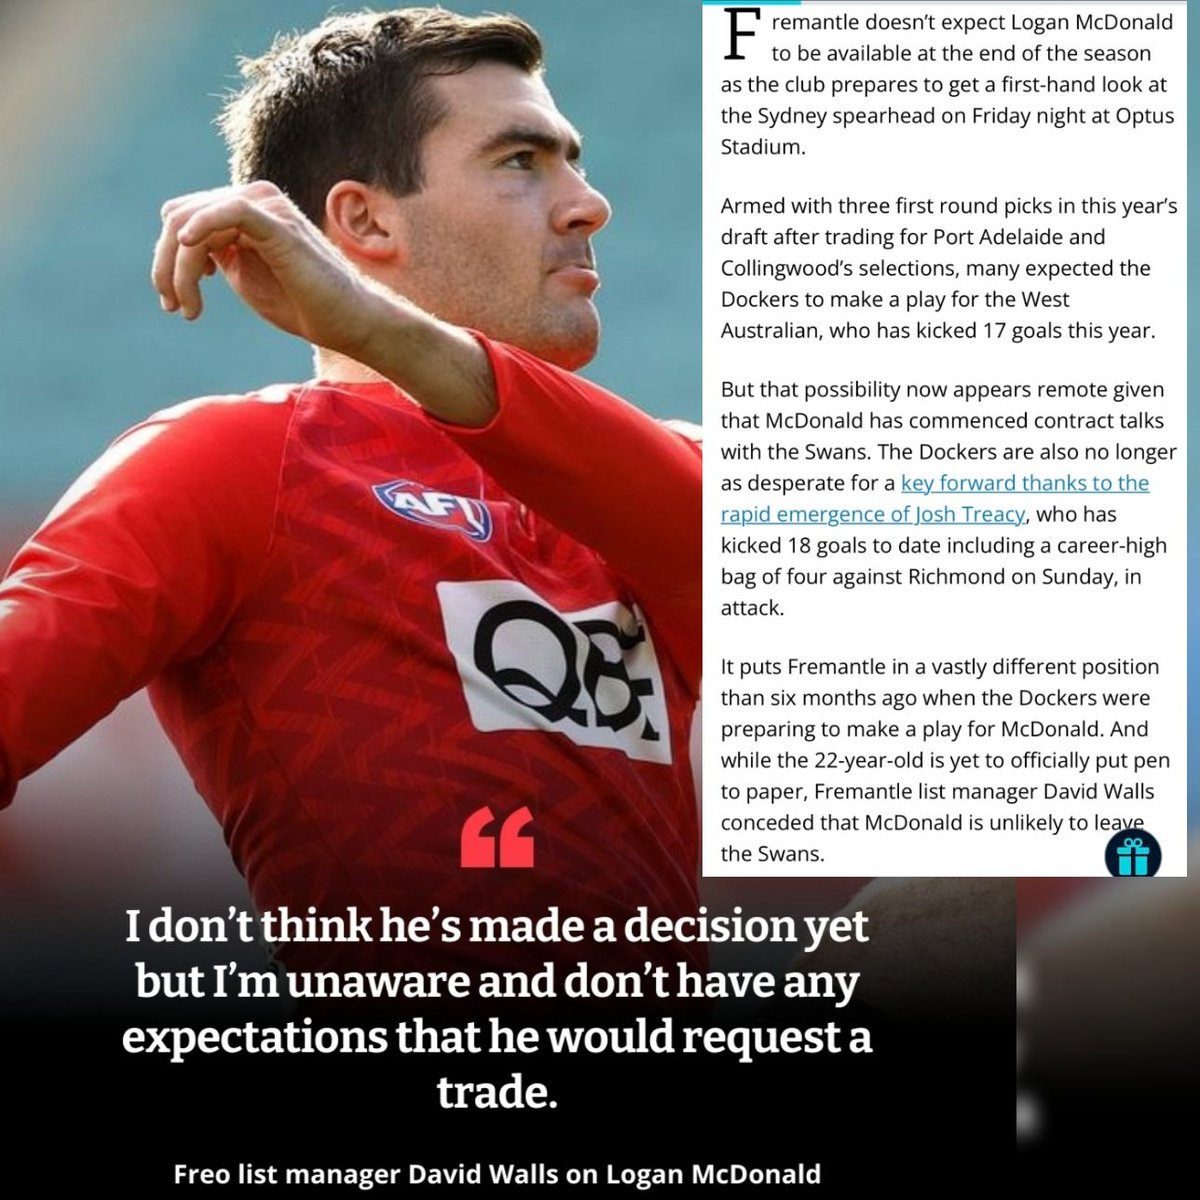 Been saying it all along,
HE AINT GOING NOWHERE!!
We can't be stopped now!!
#goswans
@sydneyswans